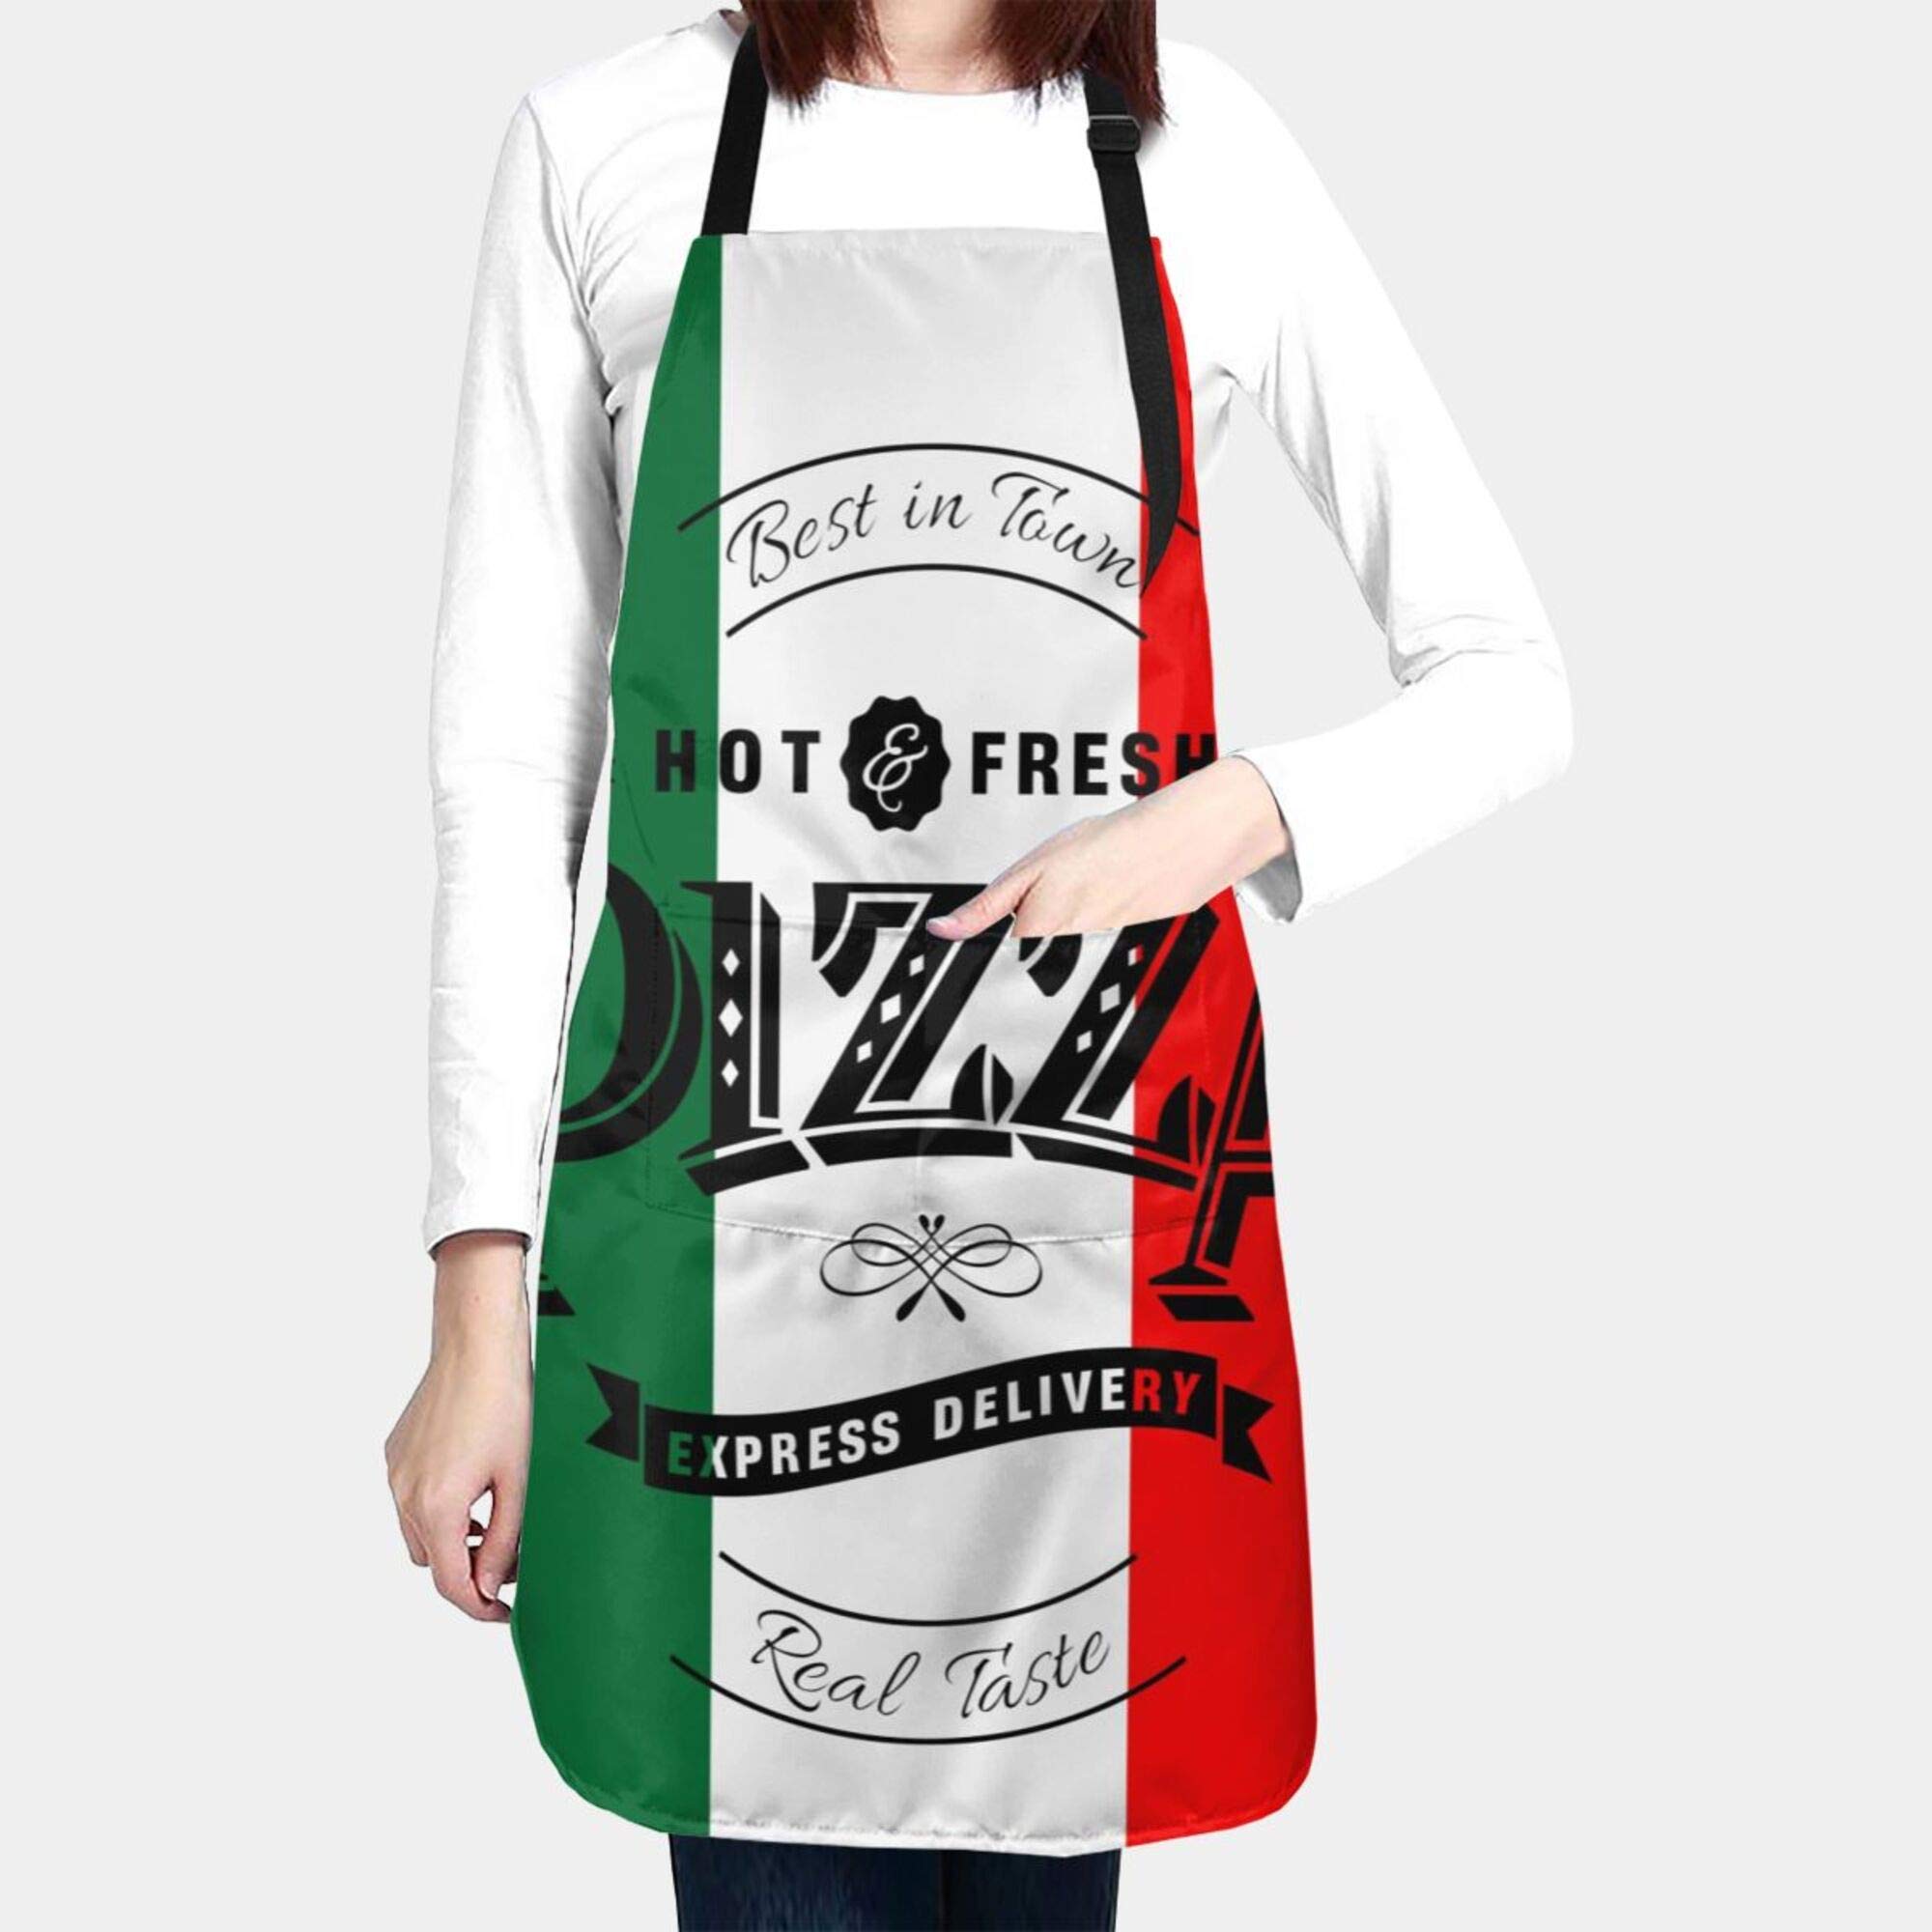 EZYES Pizza Apron, Retro Grunge Italian Flag Kitchen Aprons with Pocket & Adjustable Neck for Chef Cooking Gardening Home Adult Size